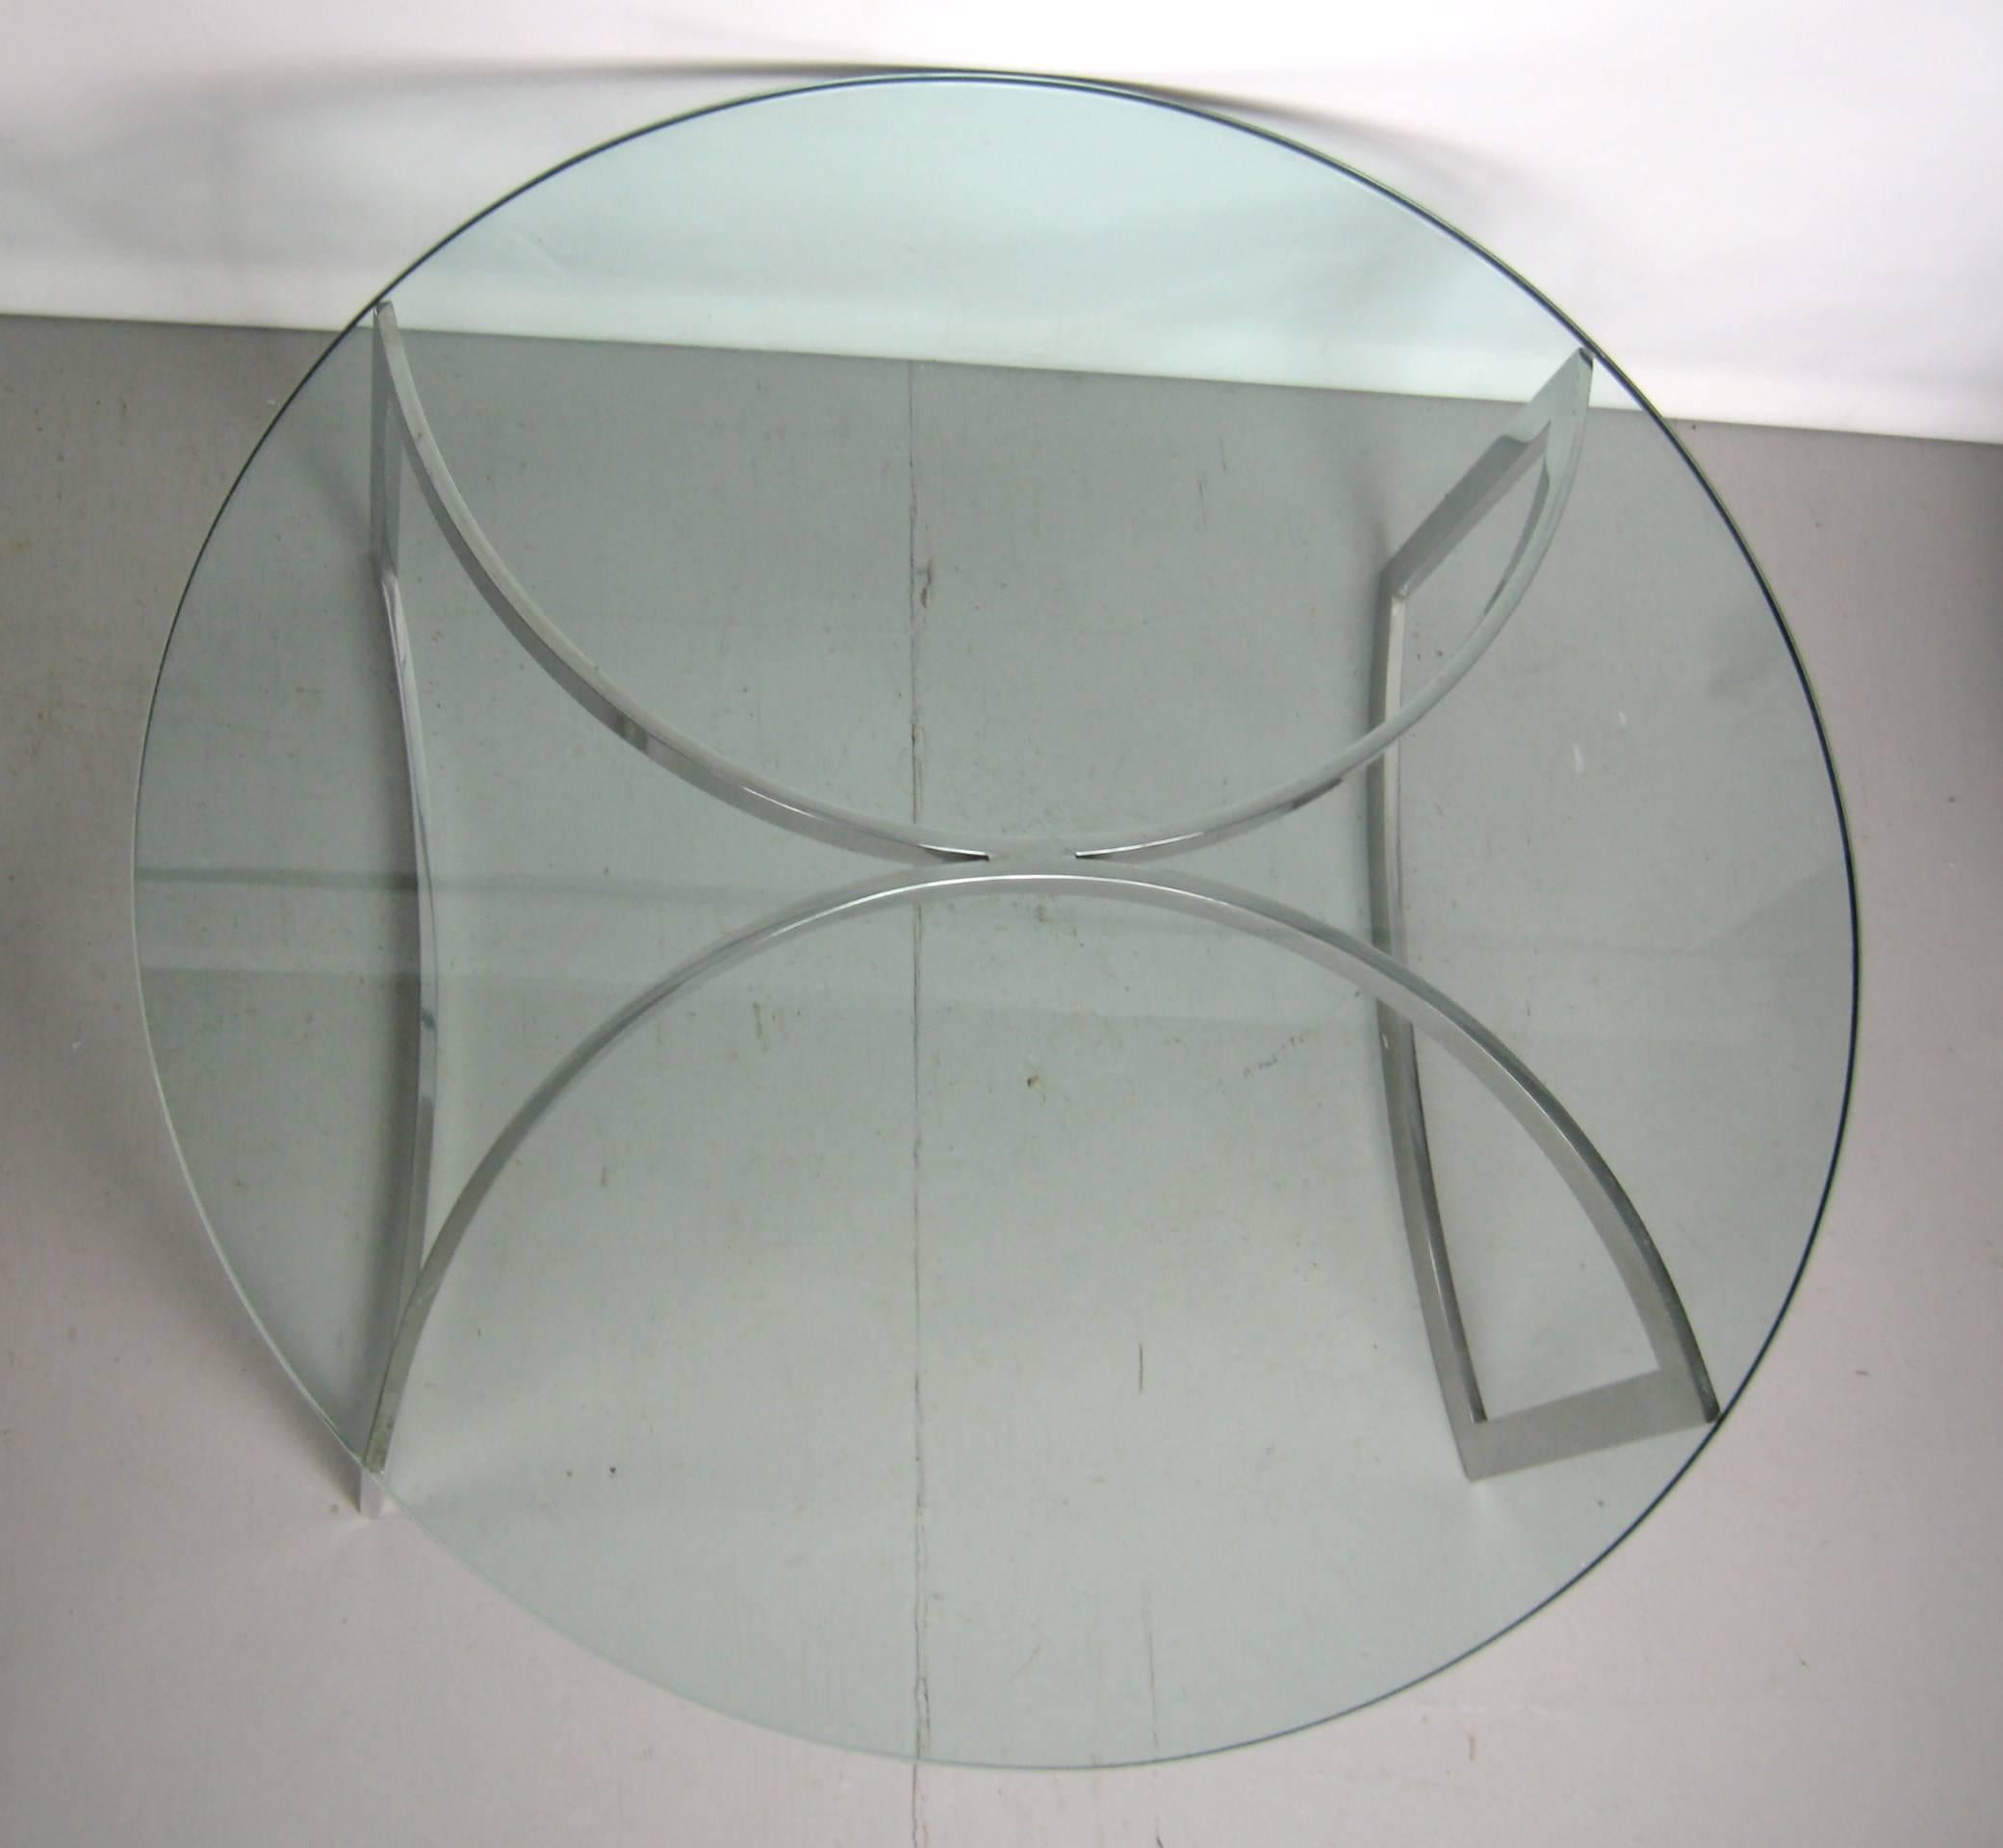 Stunning round glass topped coffee table. Heavy glass top on this wonderful modernist table.